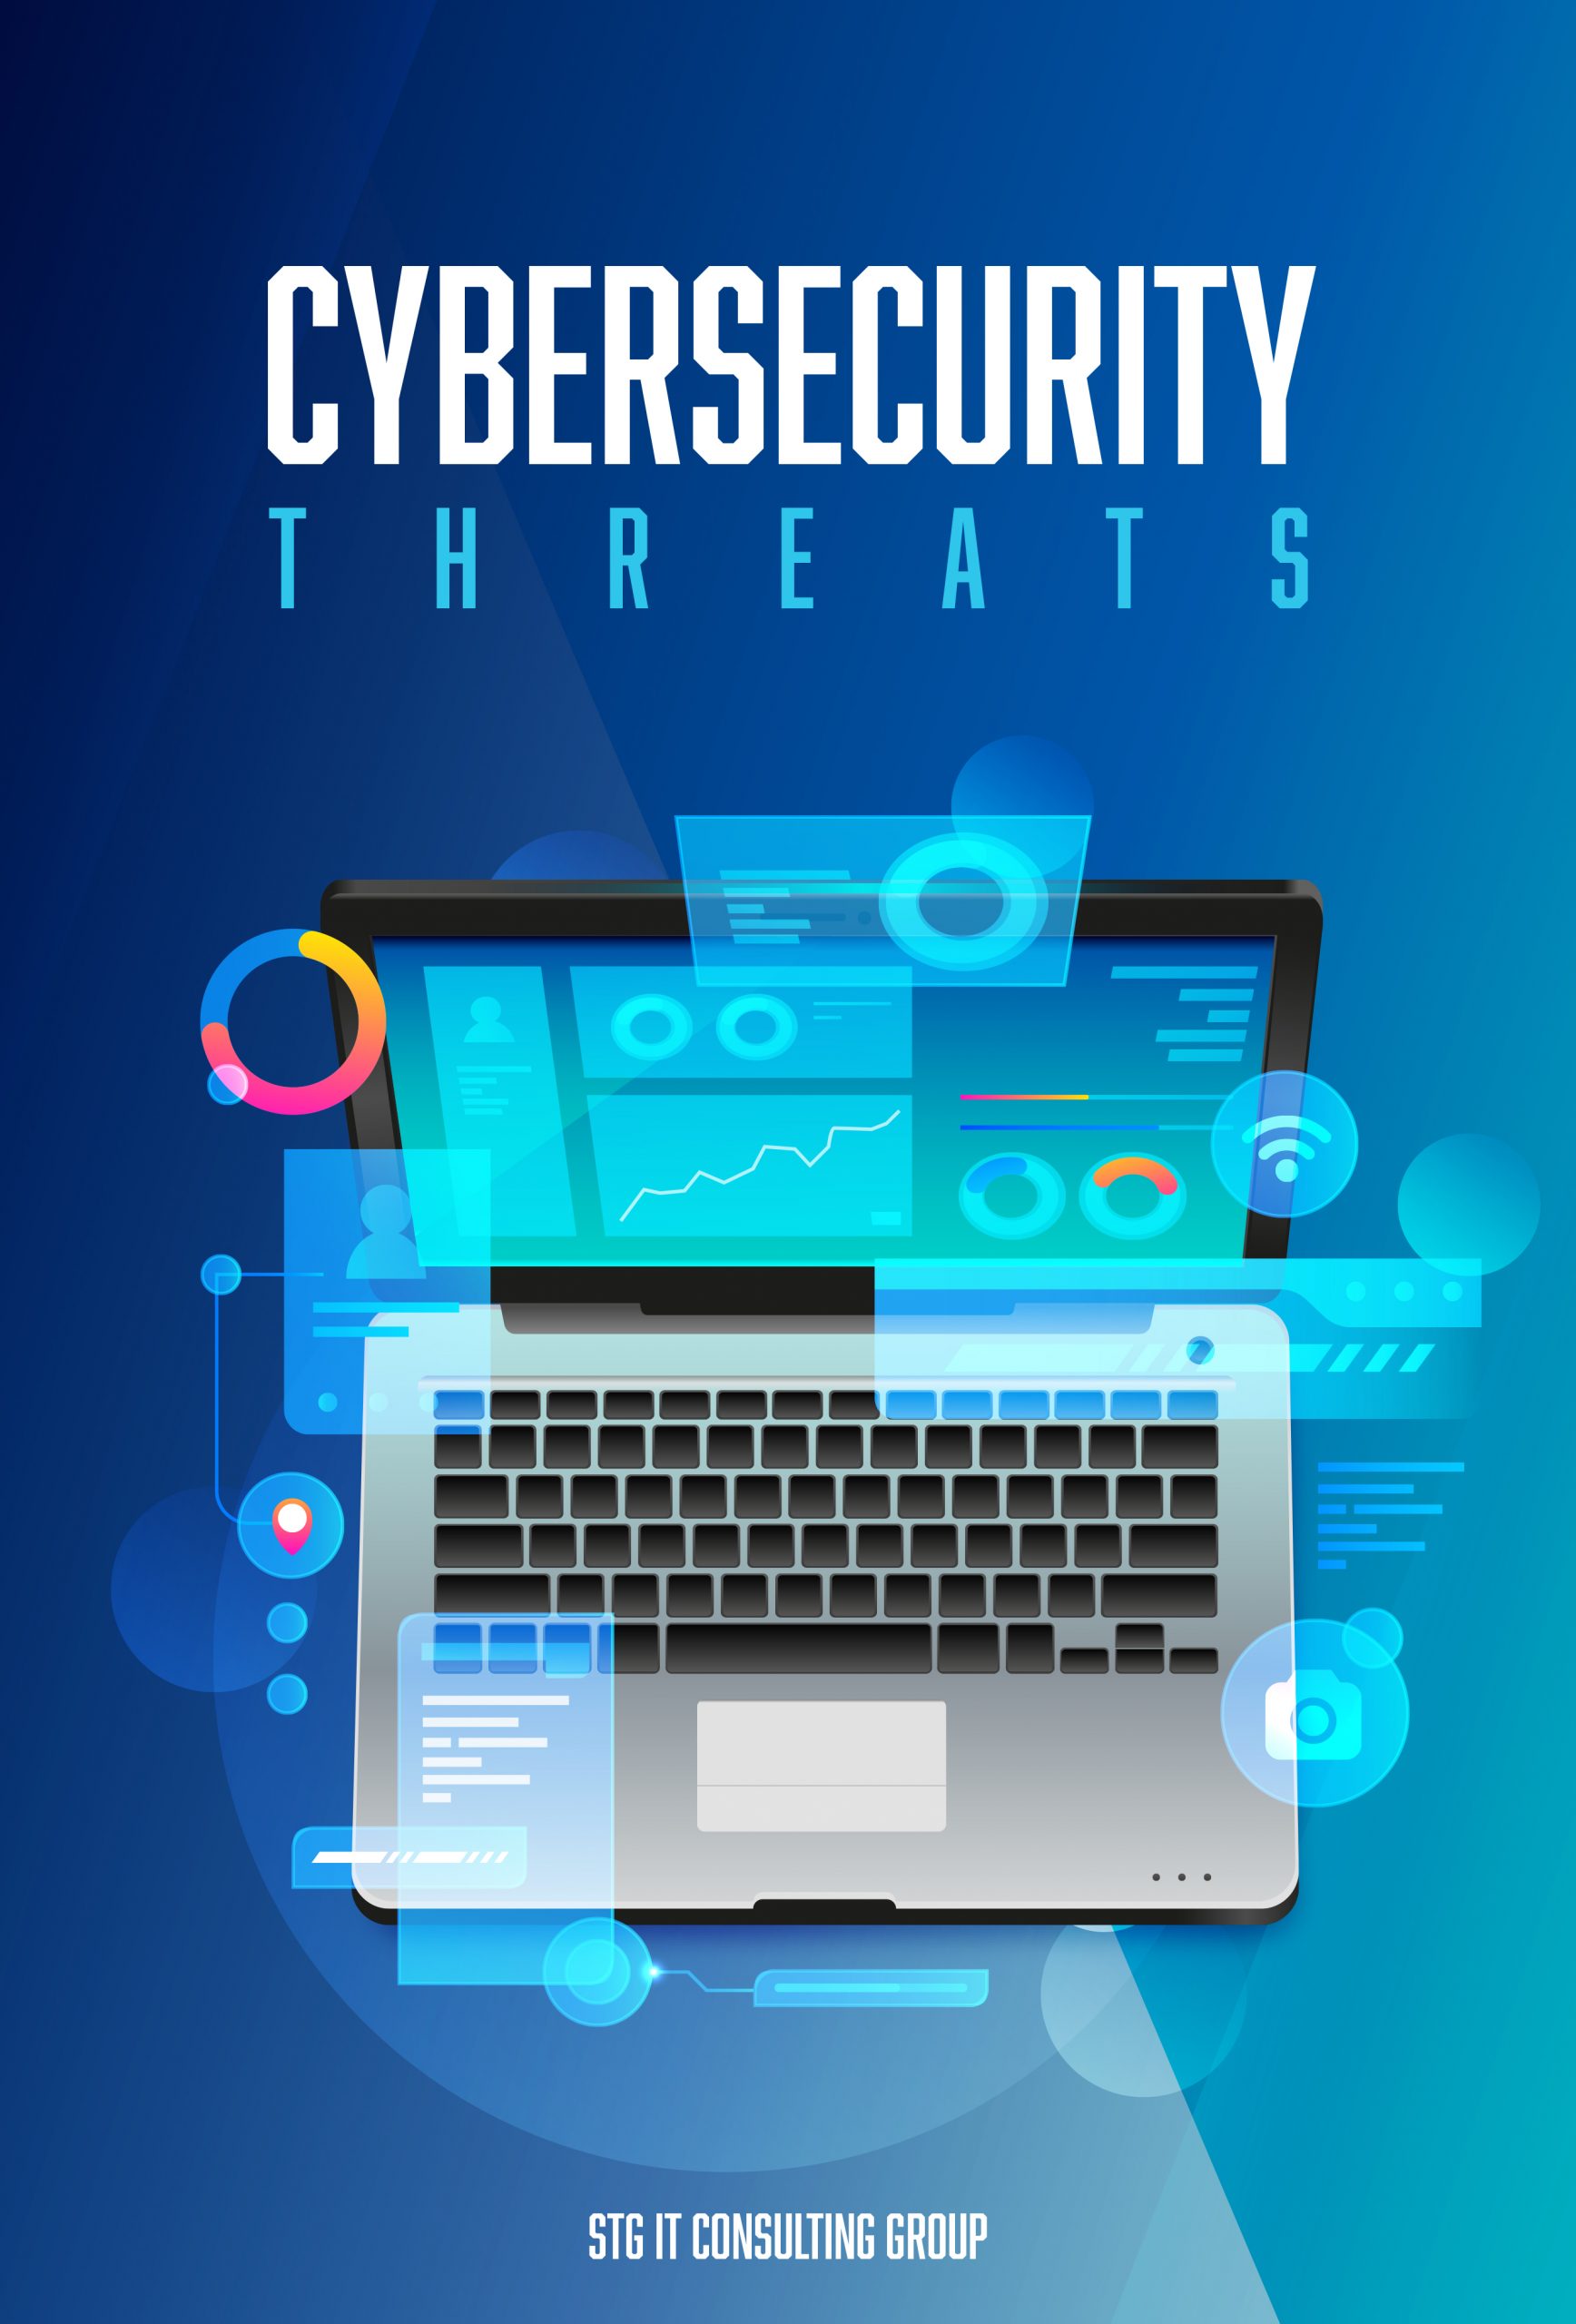 Top 5 Cybersecurity Threats for Businesses in 2021